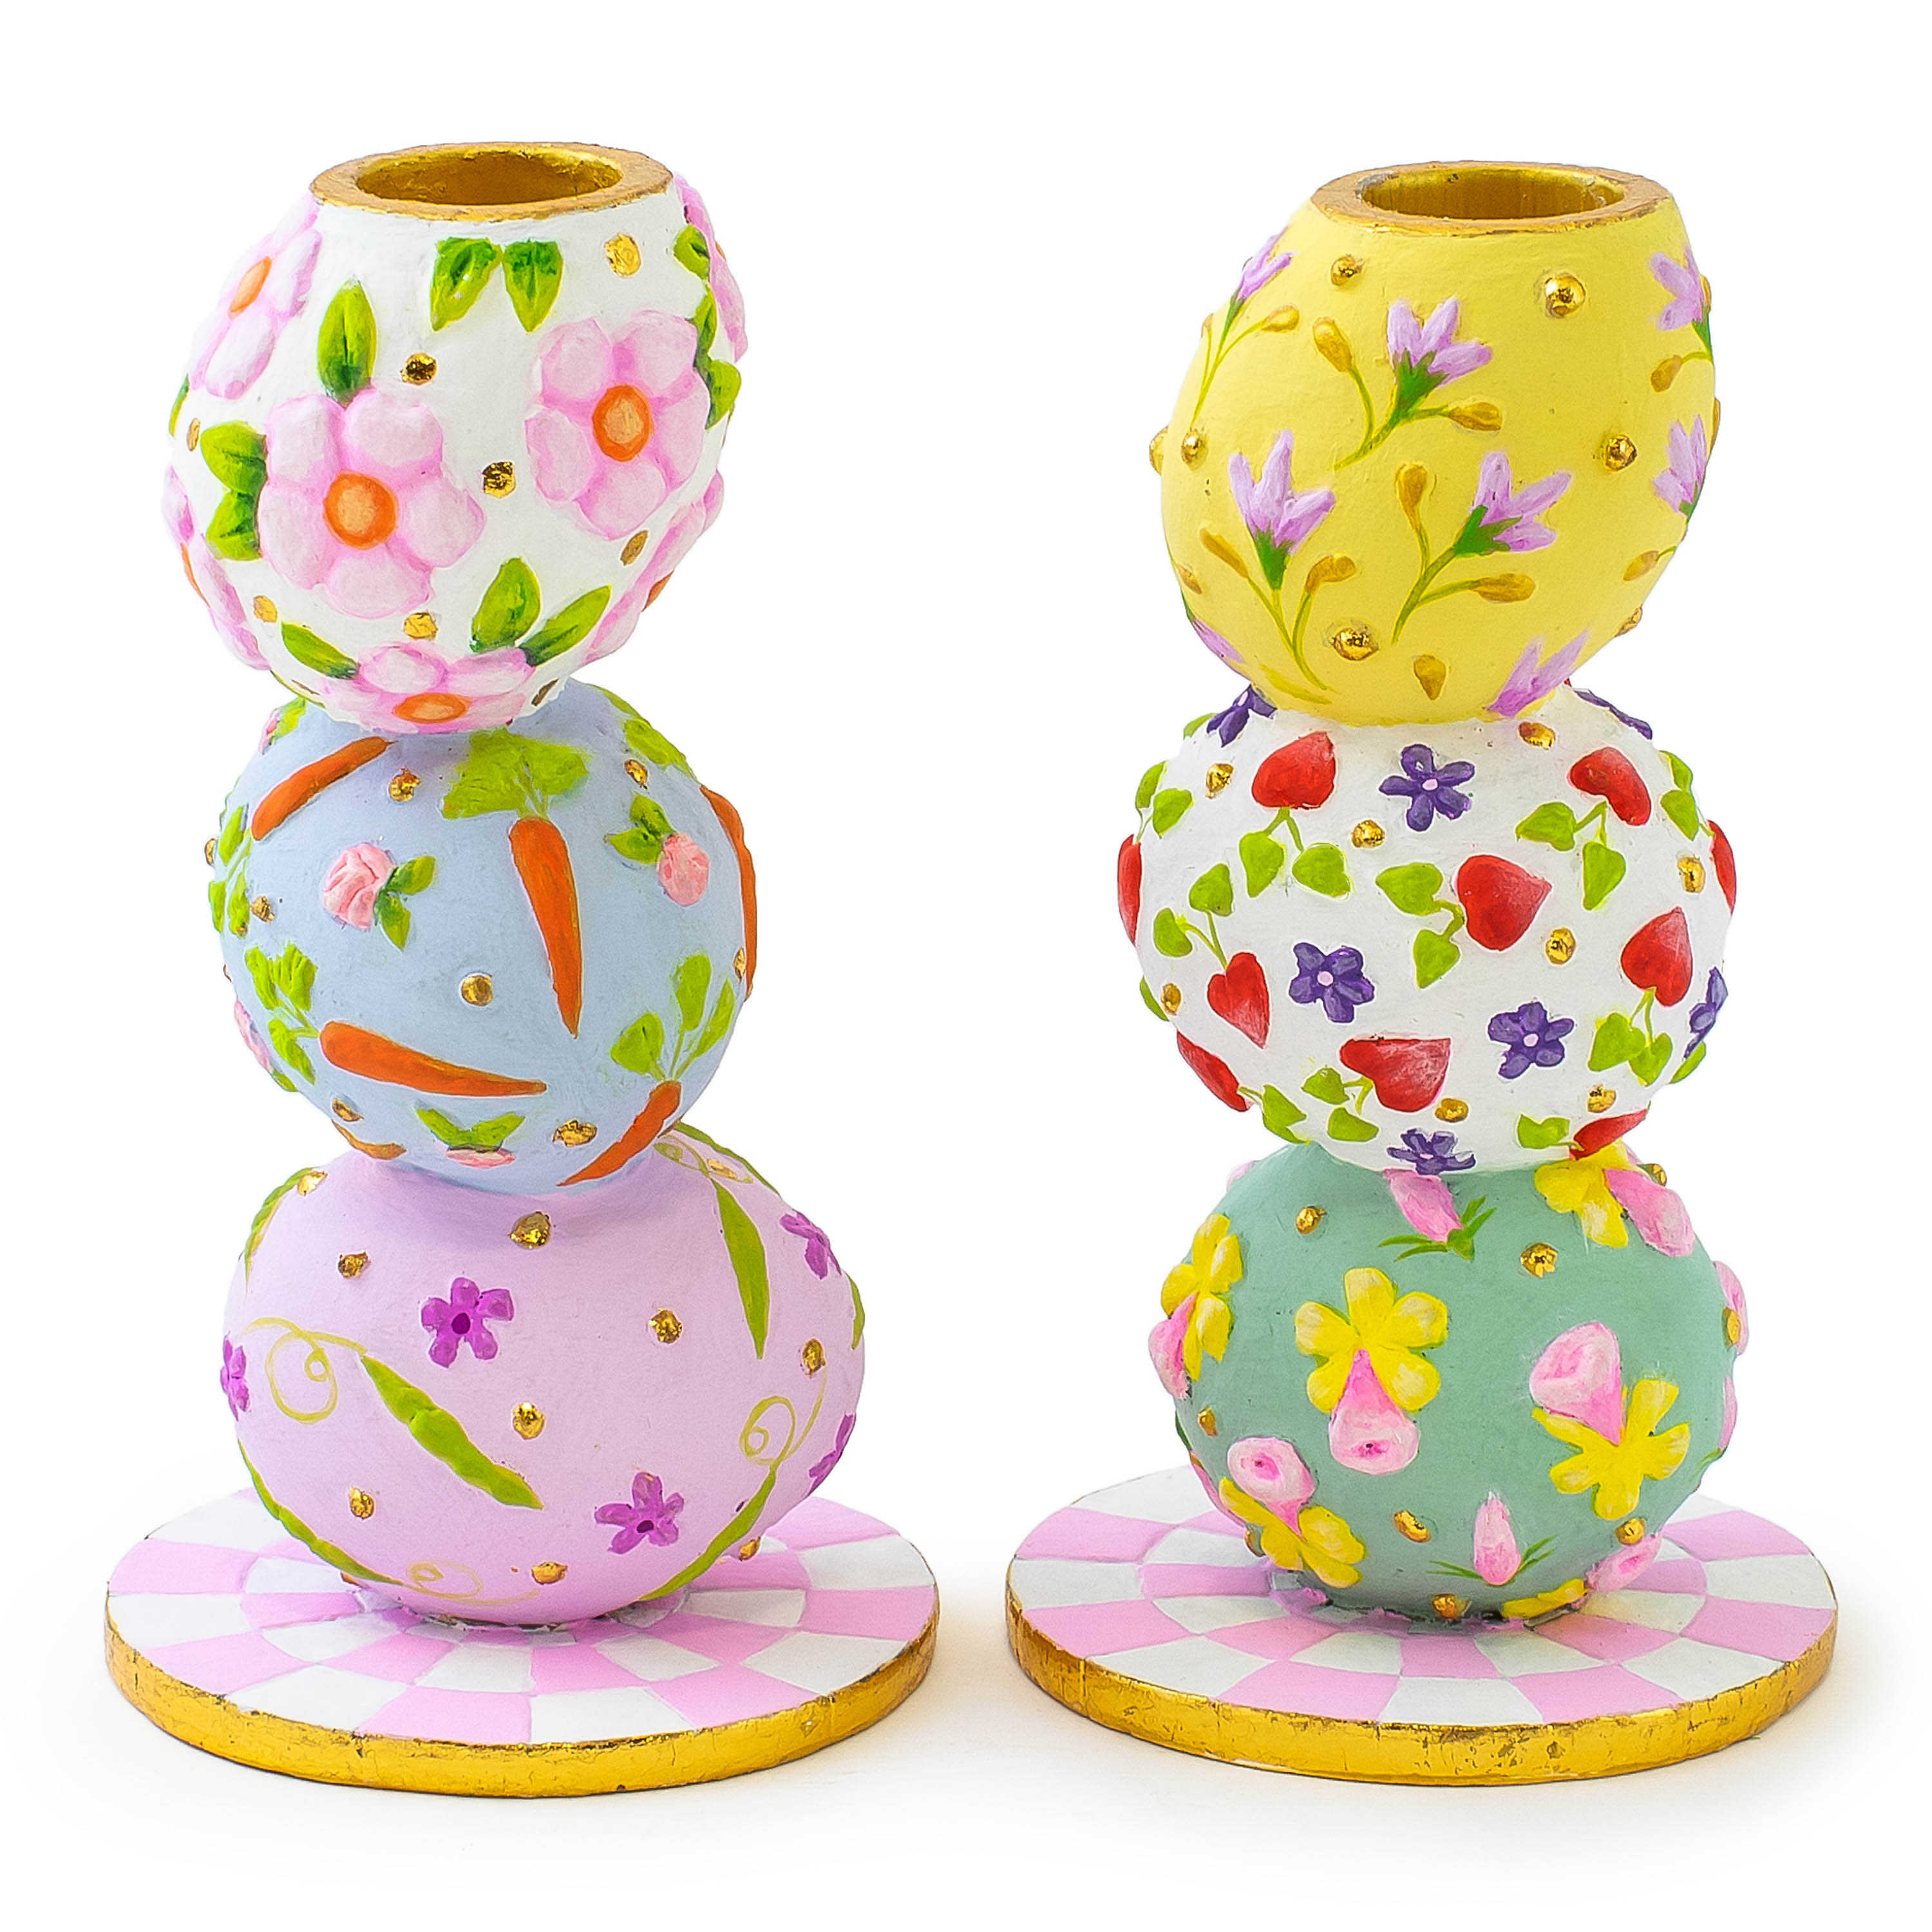 Patience Brewster Egg Candle Holders, Set of 2 mackenzie-childs Panama 0